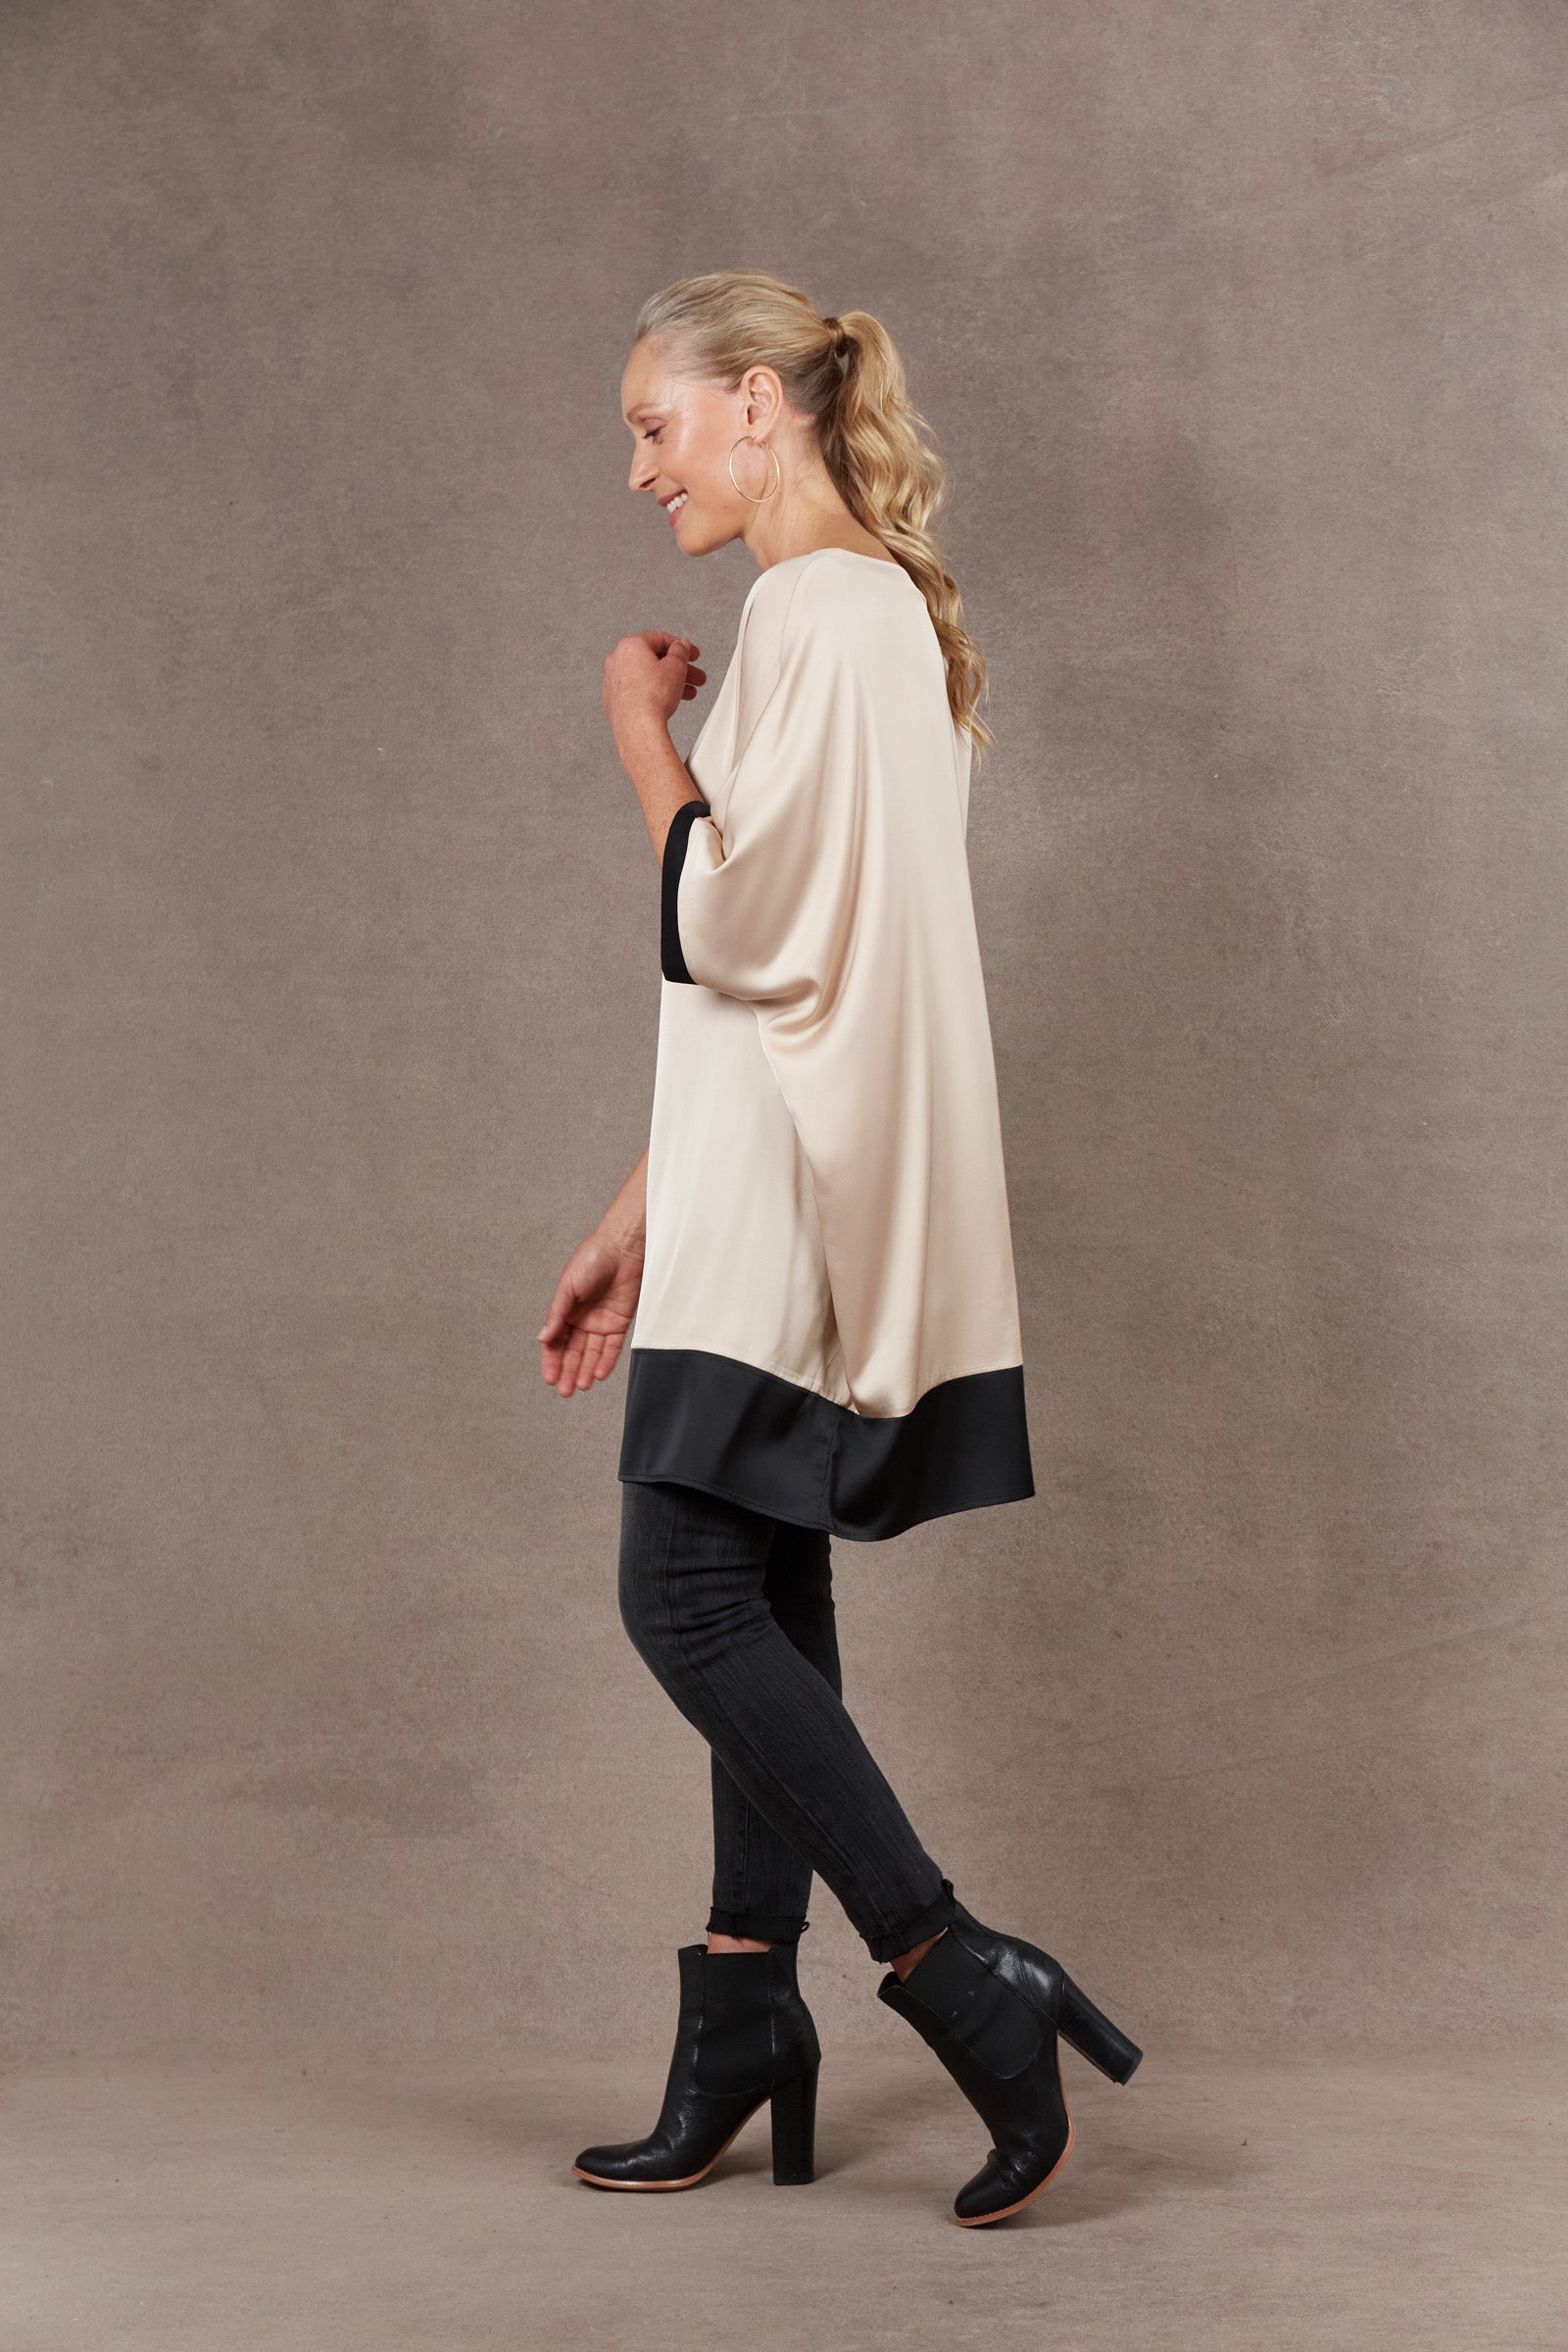 Norse Relax Top - Oyster - eb&ive Clothing - Top One Size Dressy